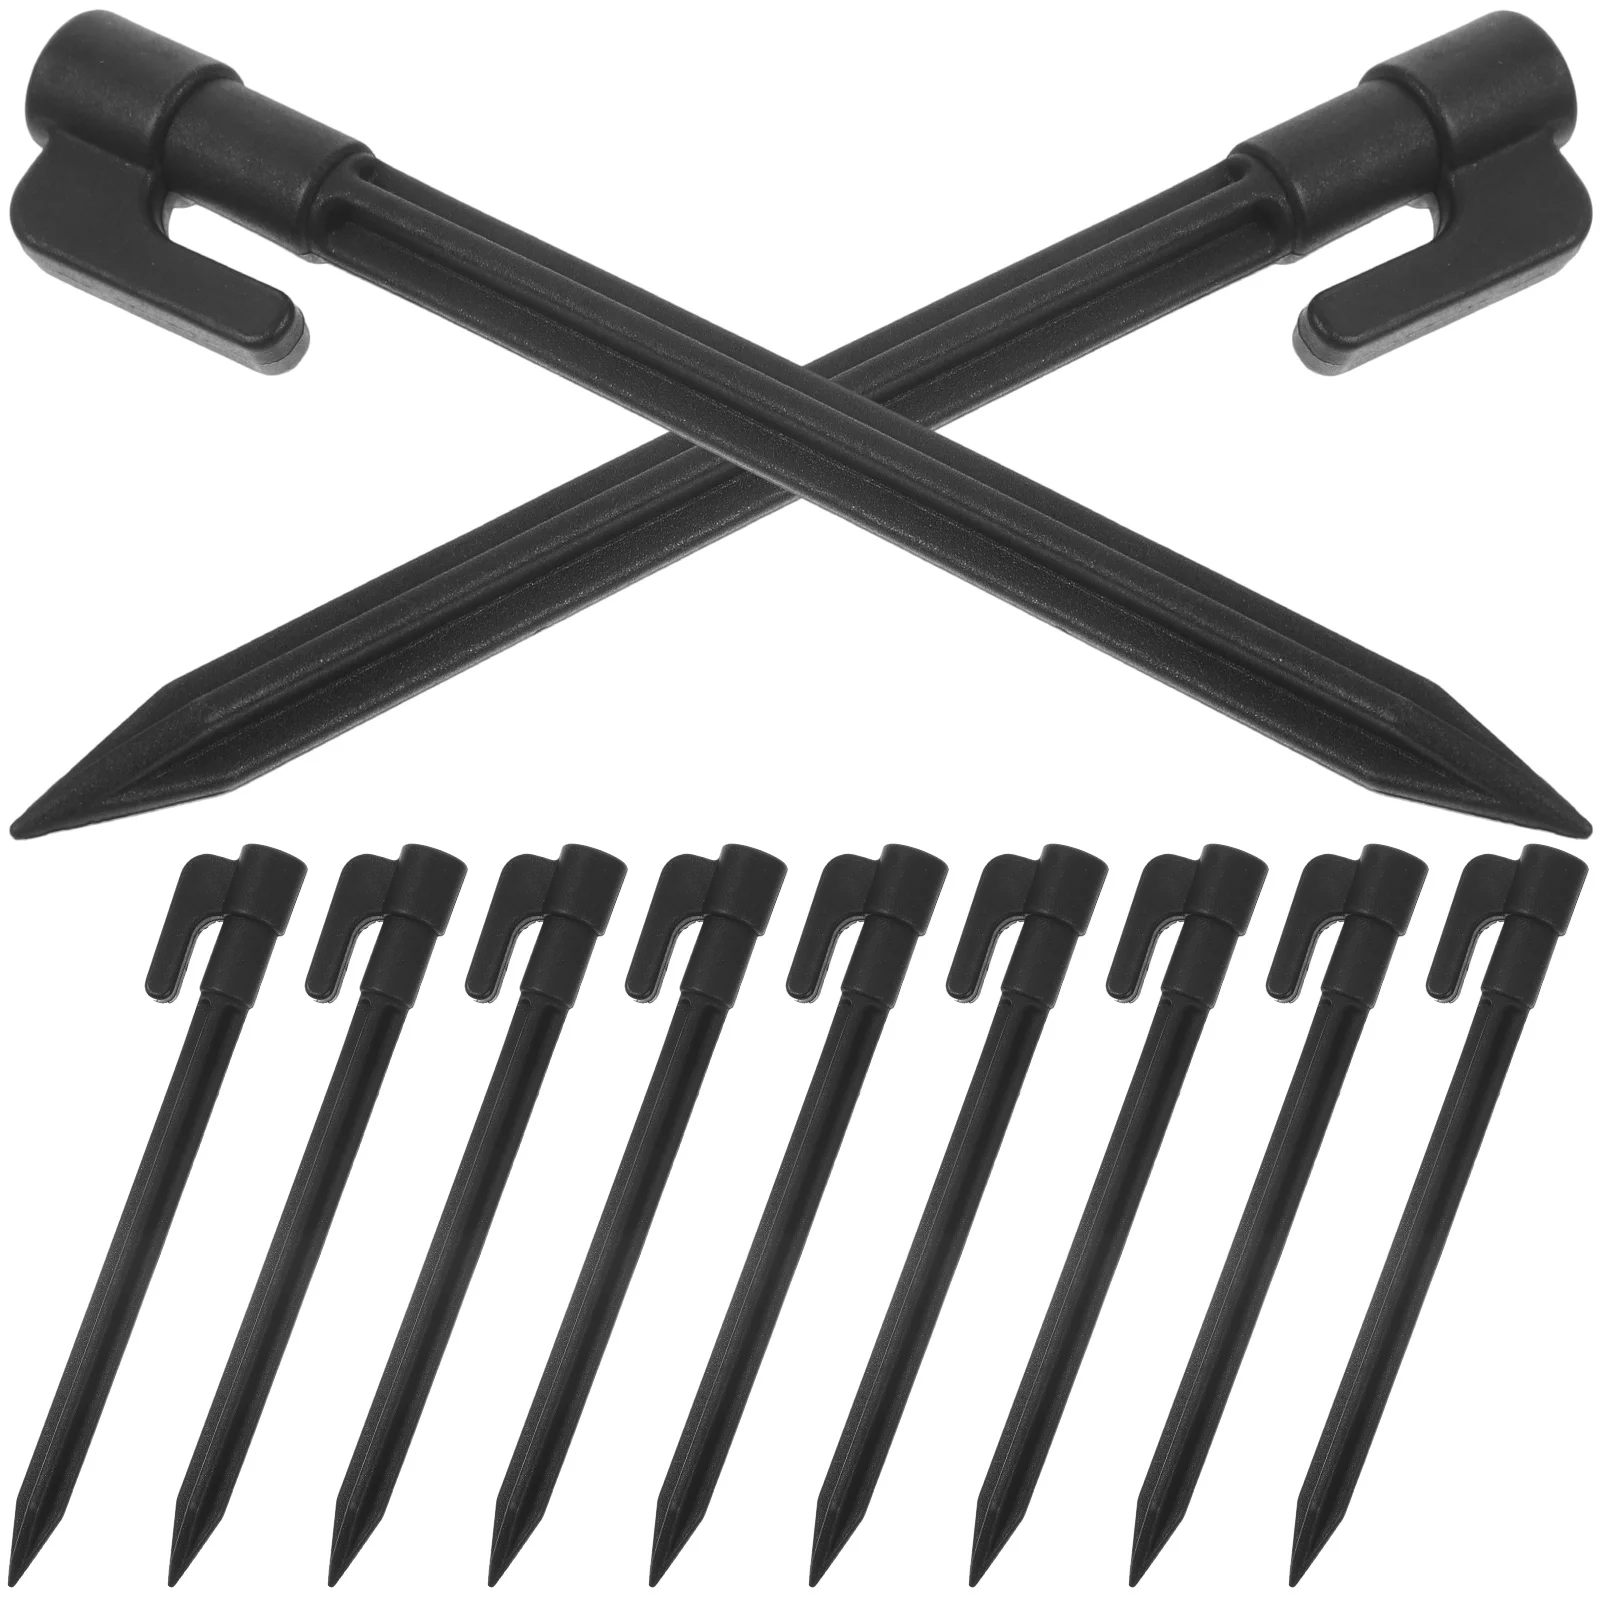 

30 Pcs Garden Pile Heavy Duty Stakes Lawn Stakes Decoration Windproof Ground Nail Fiberglass Rod Tent Spikes Tent Pegs